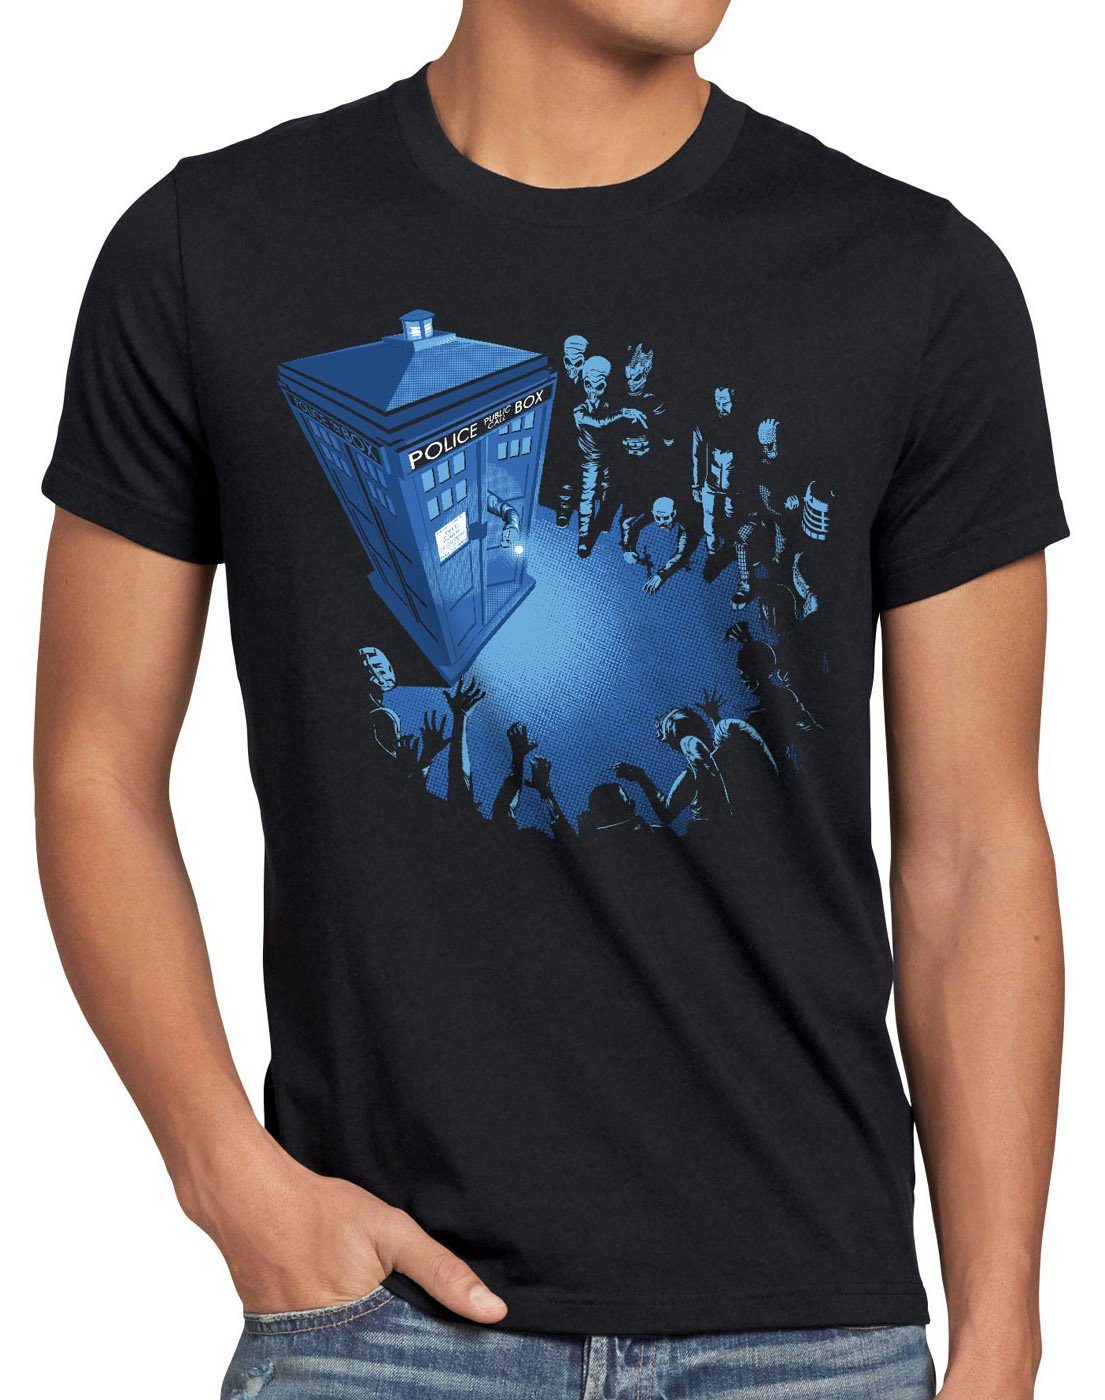 style3 Print-Shirt Herren T-Shirt Who Notrufzelle dalek who time police dr box space doctor tardis